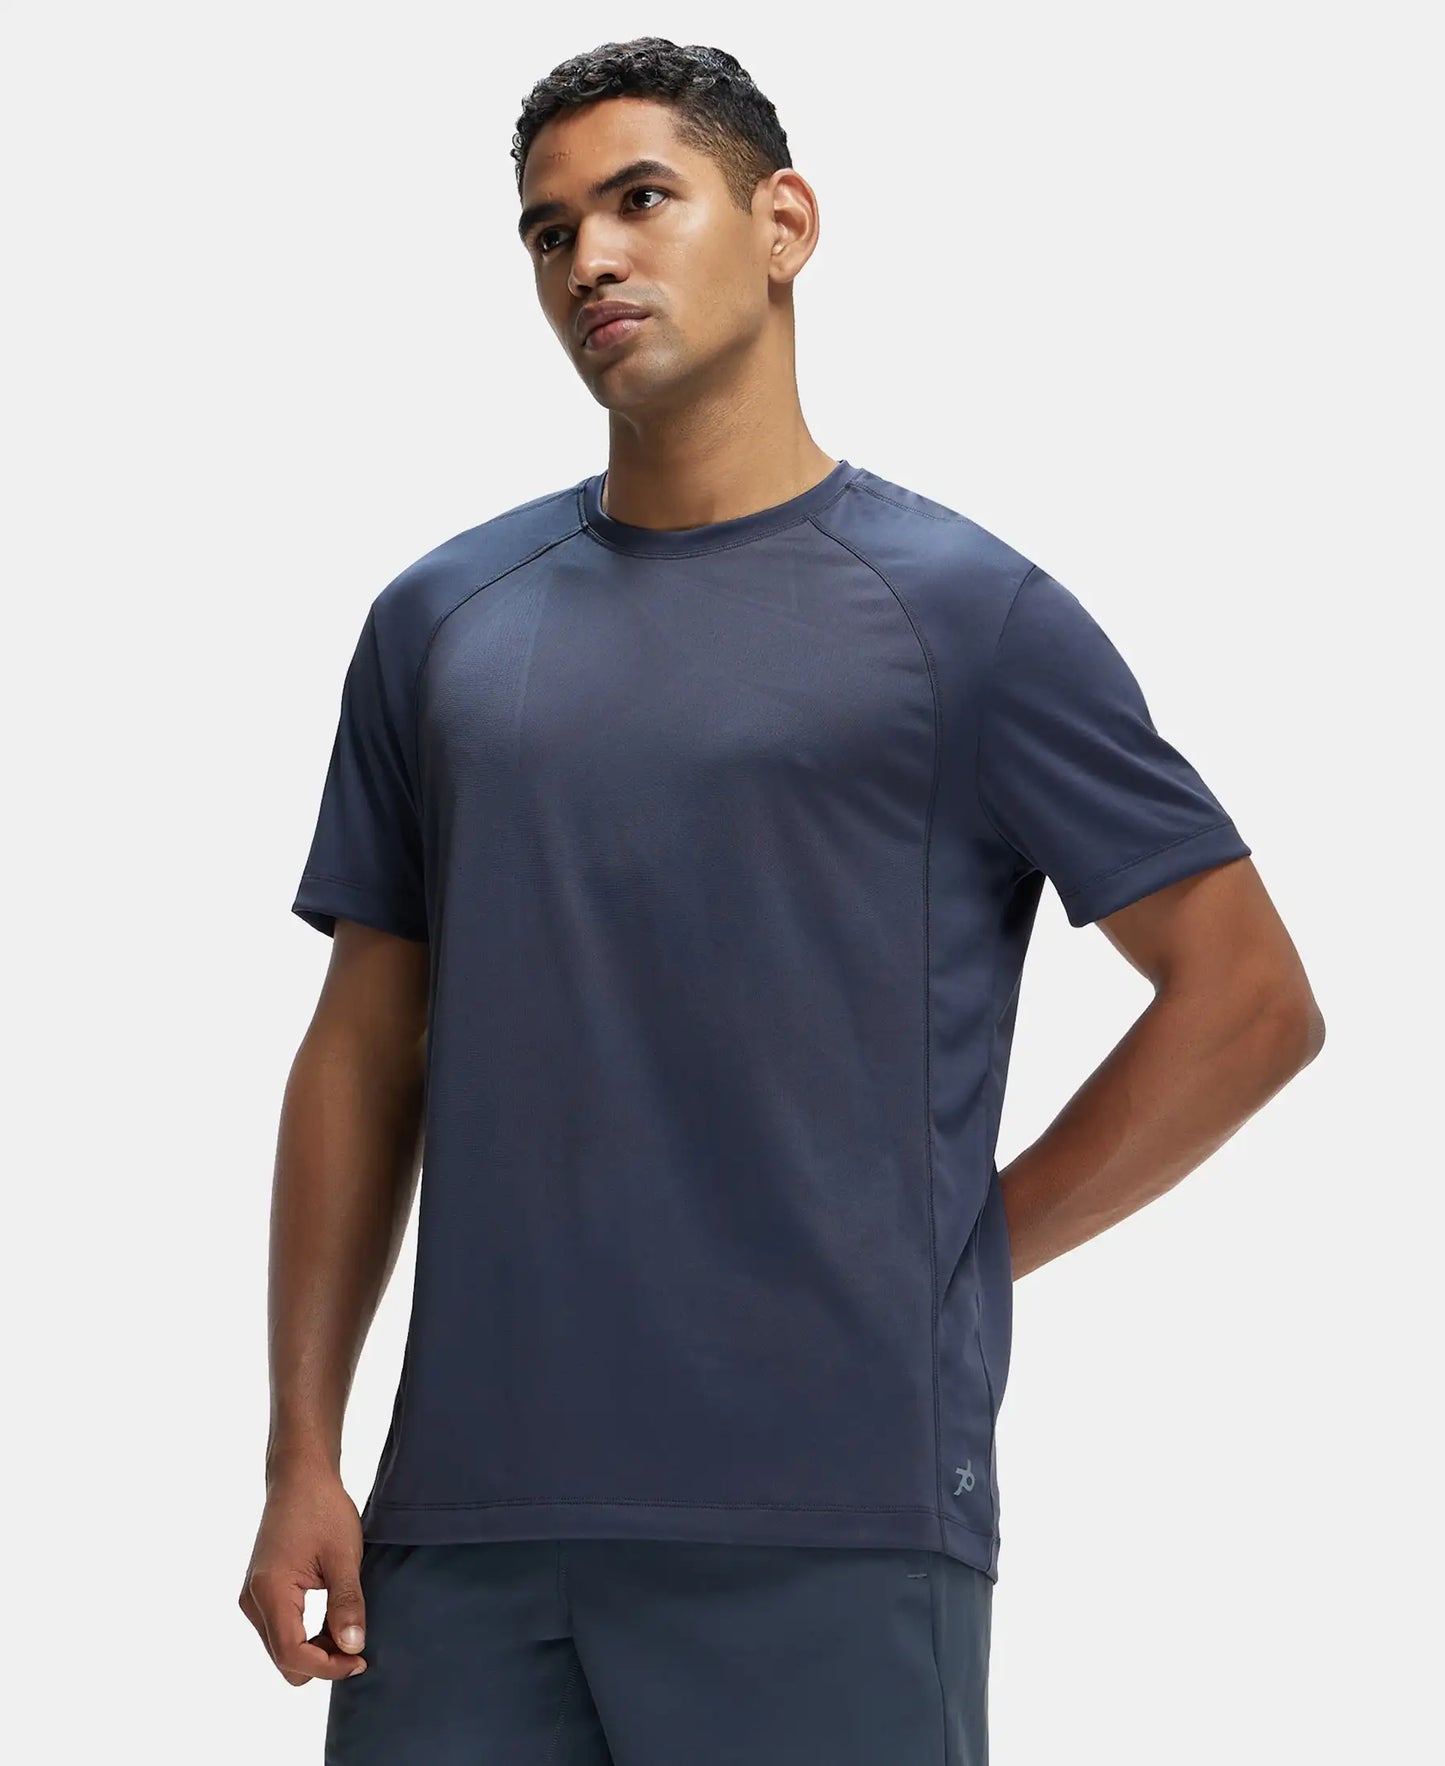 Microfiber Fabric Round Neck Half Sleeve T-Shirt with Breathable Mesh - Graphite-5